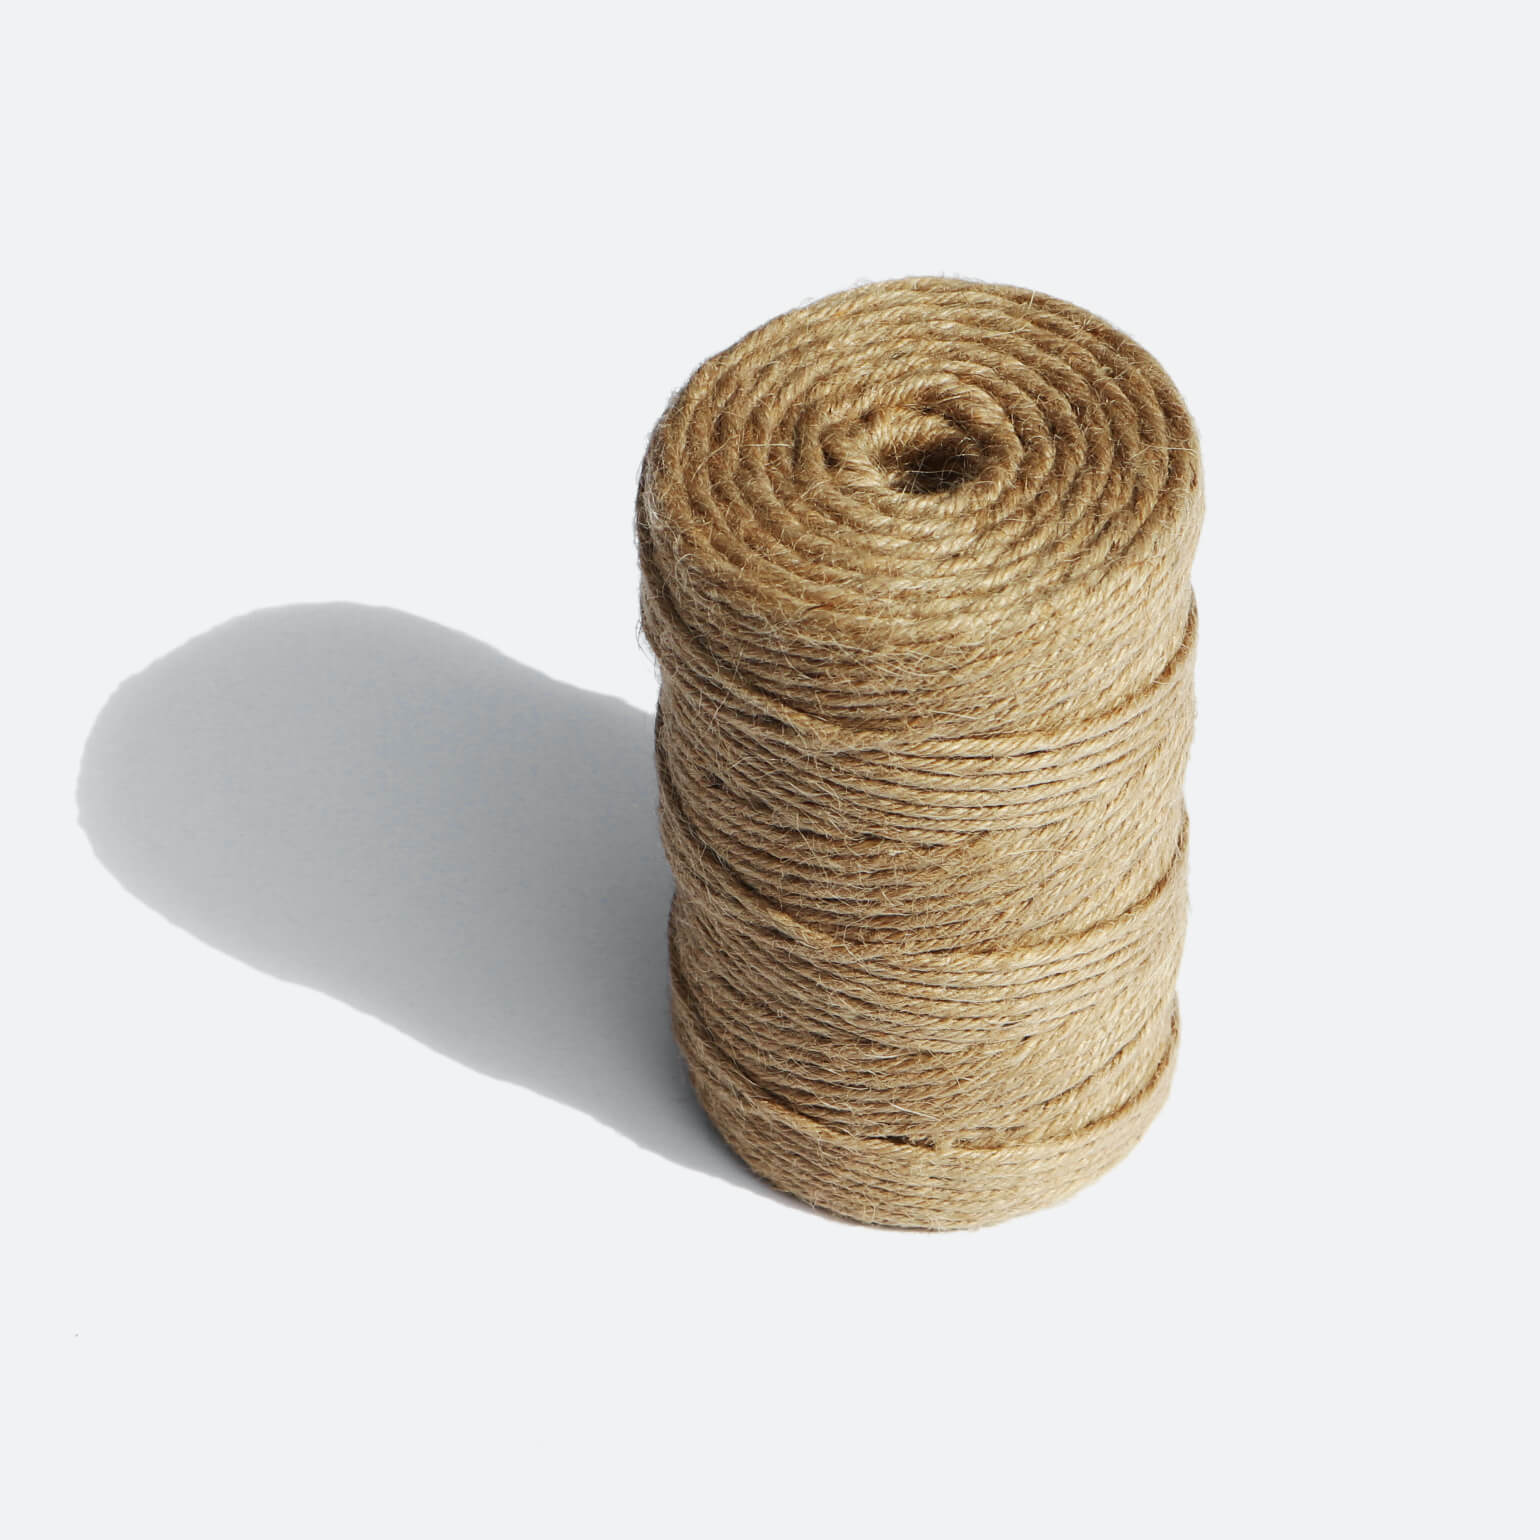 China Factory Jute Cord, Jute String, Jute Twine, 1 Ply, for